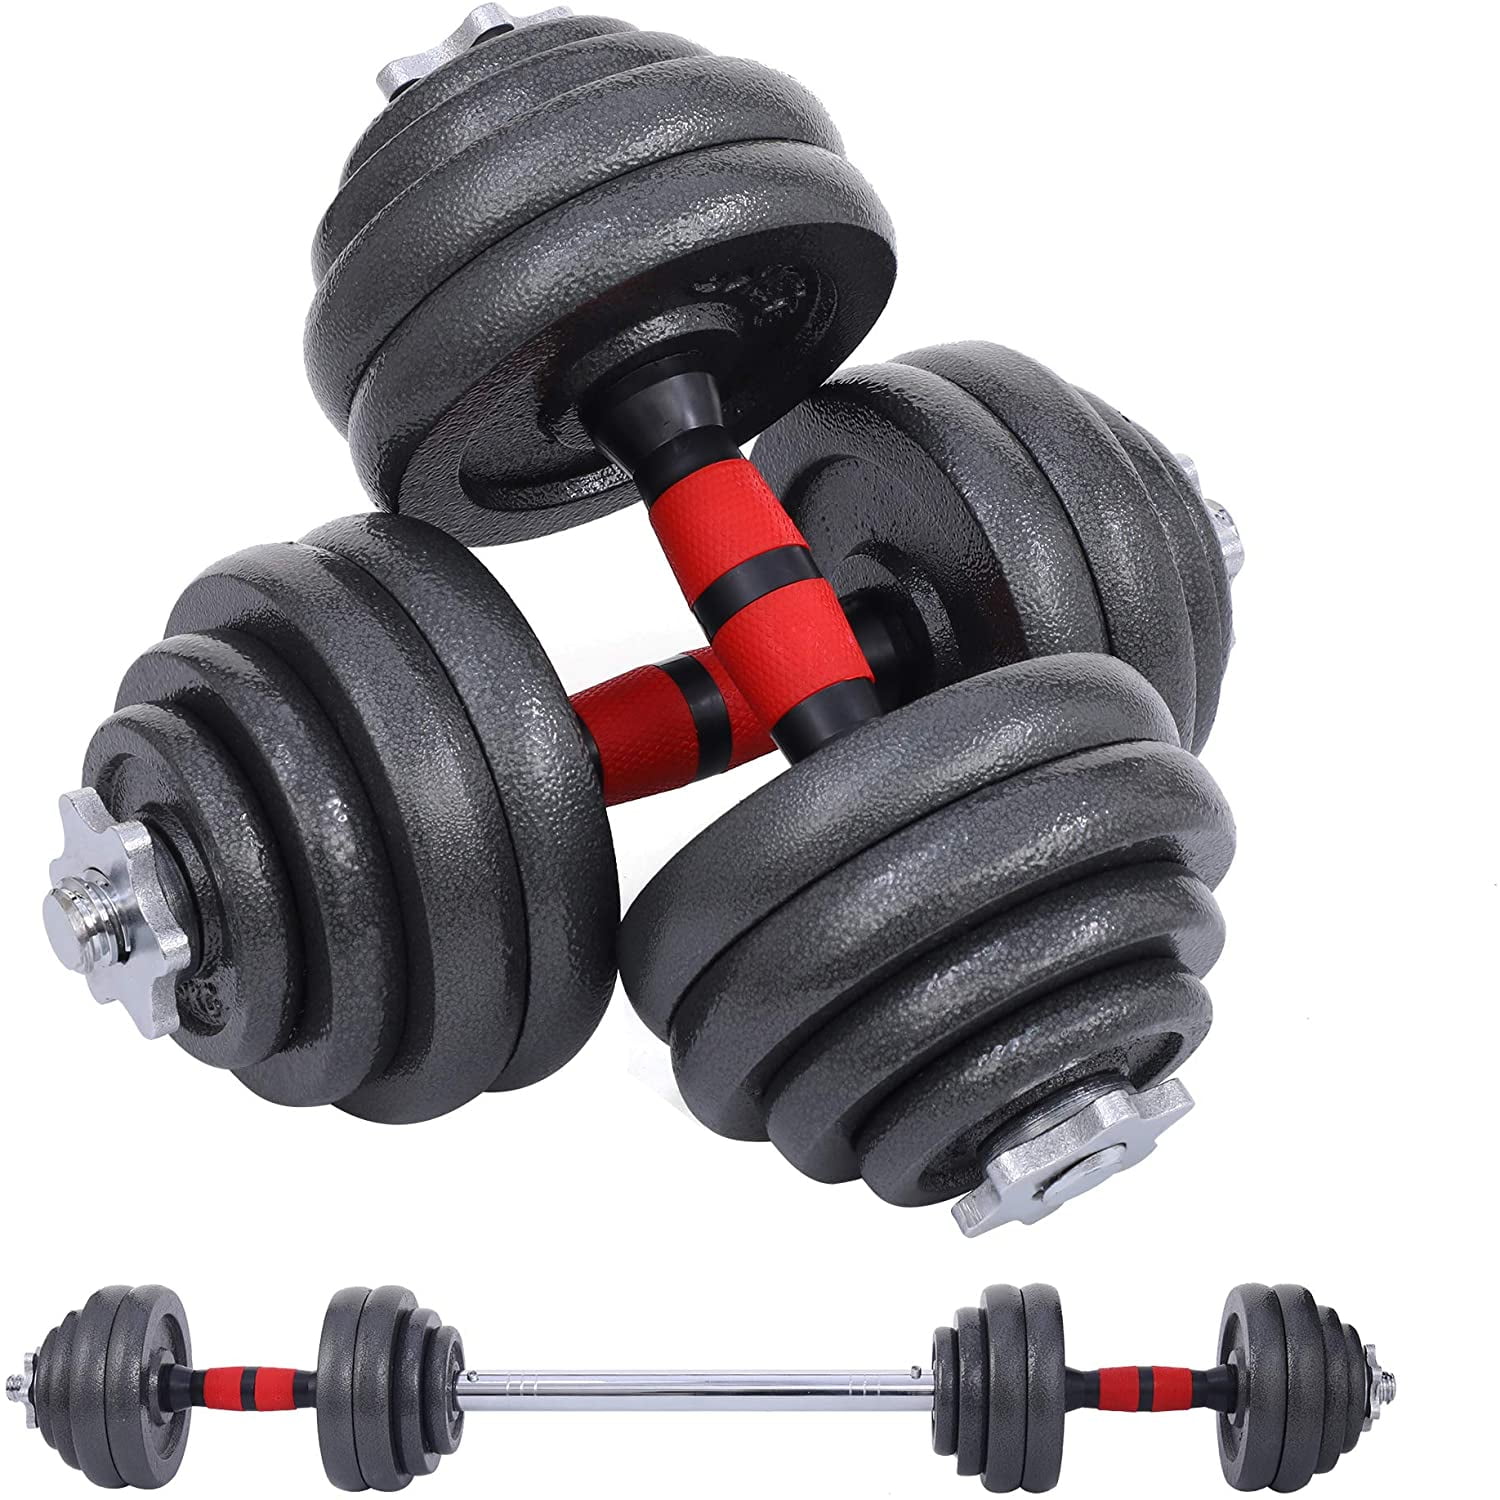 110LB Adjustable Full Steel Dumbbell Weight Set For Gym Home Body Workout Hot. 